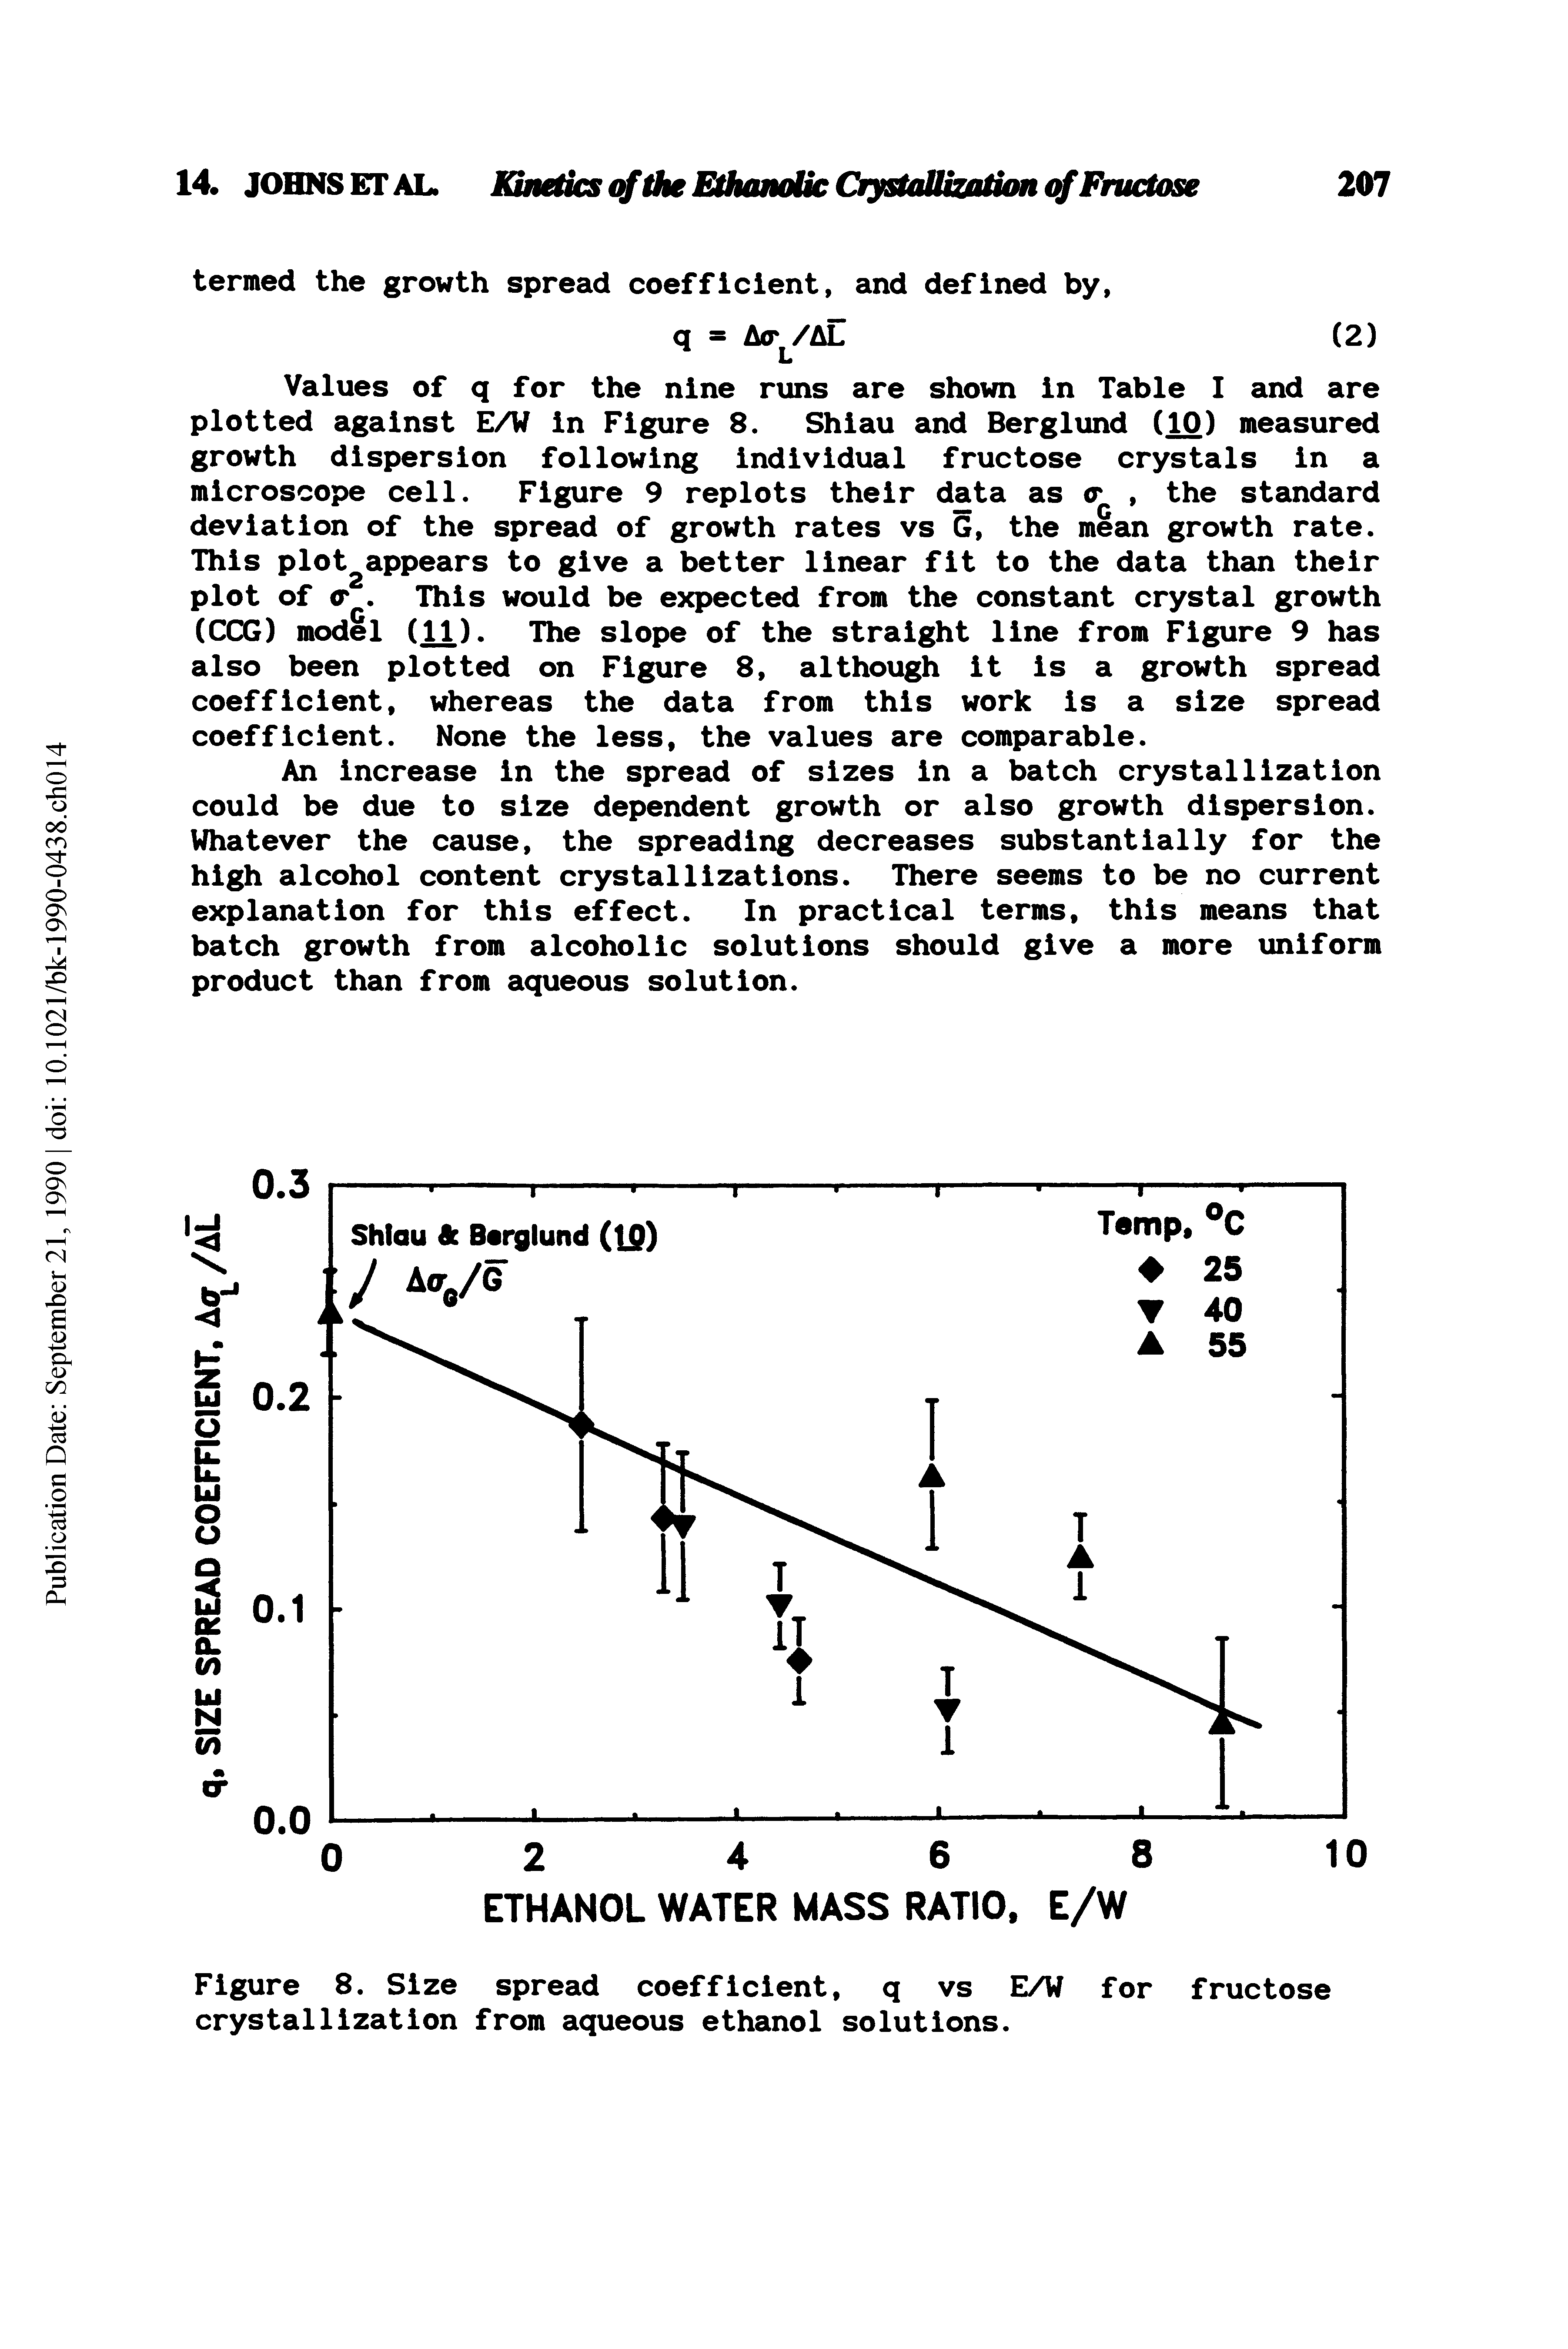 Figure 8. Size spread coefficient, q vs E/W for fructose crystallization from aqueous ethanol solutions.